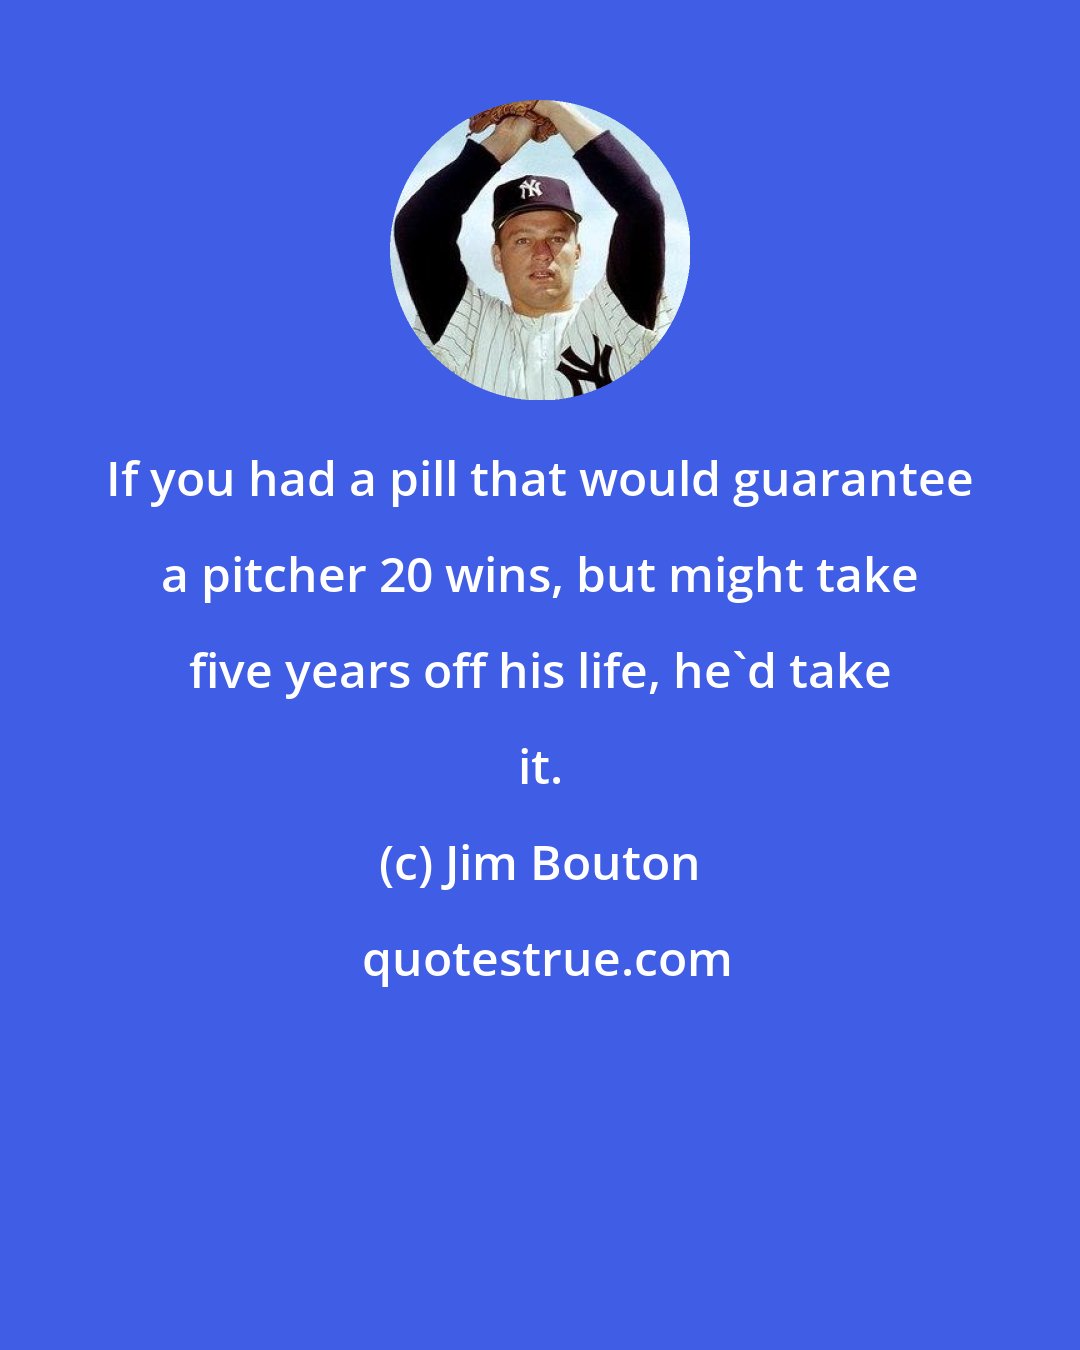 Jim Bouton: If you had a pill that would guarantee a pitcher 20 wins, but might take five years off his life, he'd take it.